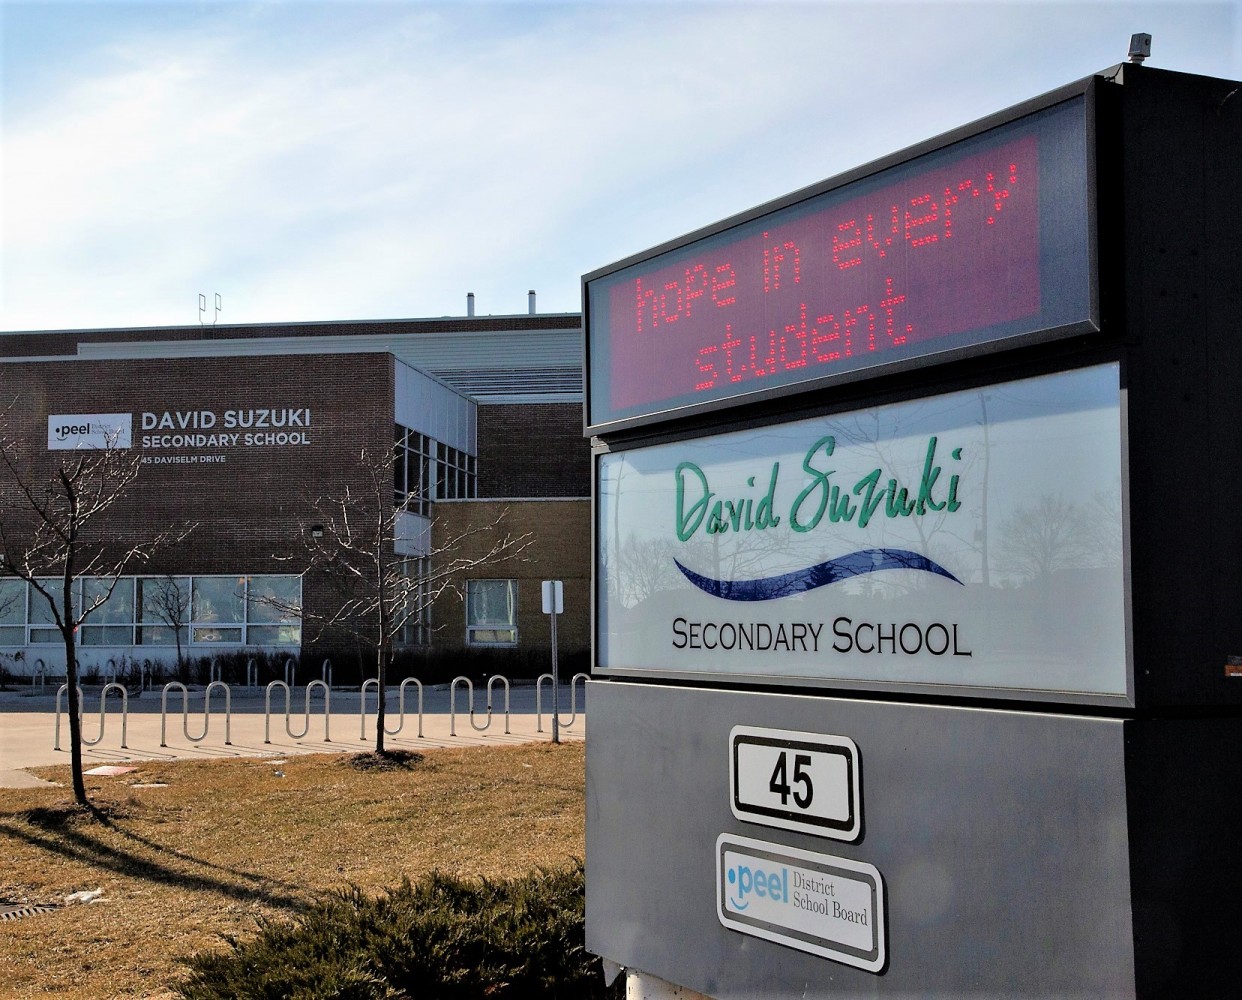 Latest PDSB meeting further evidence of a board unwilling to confront